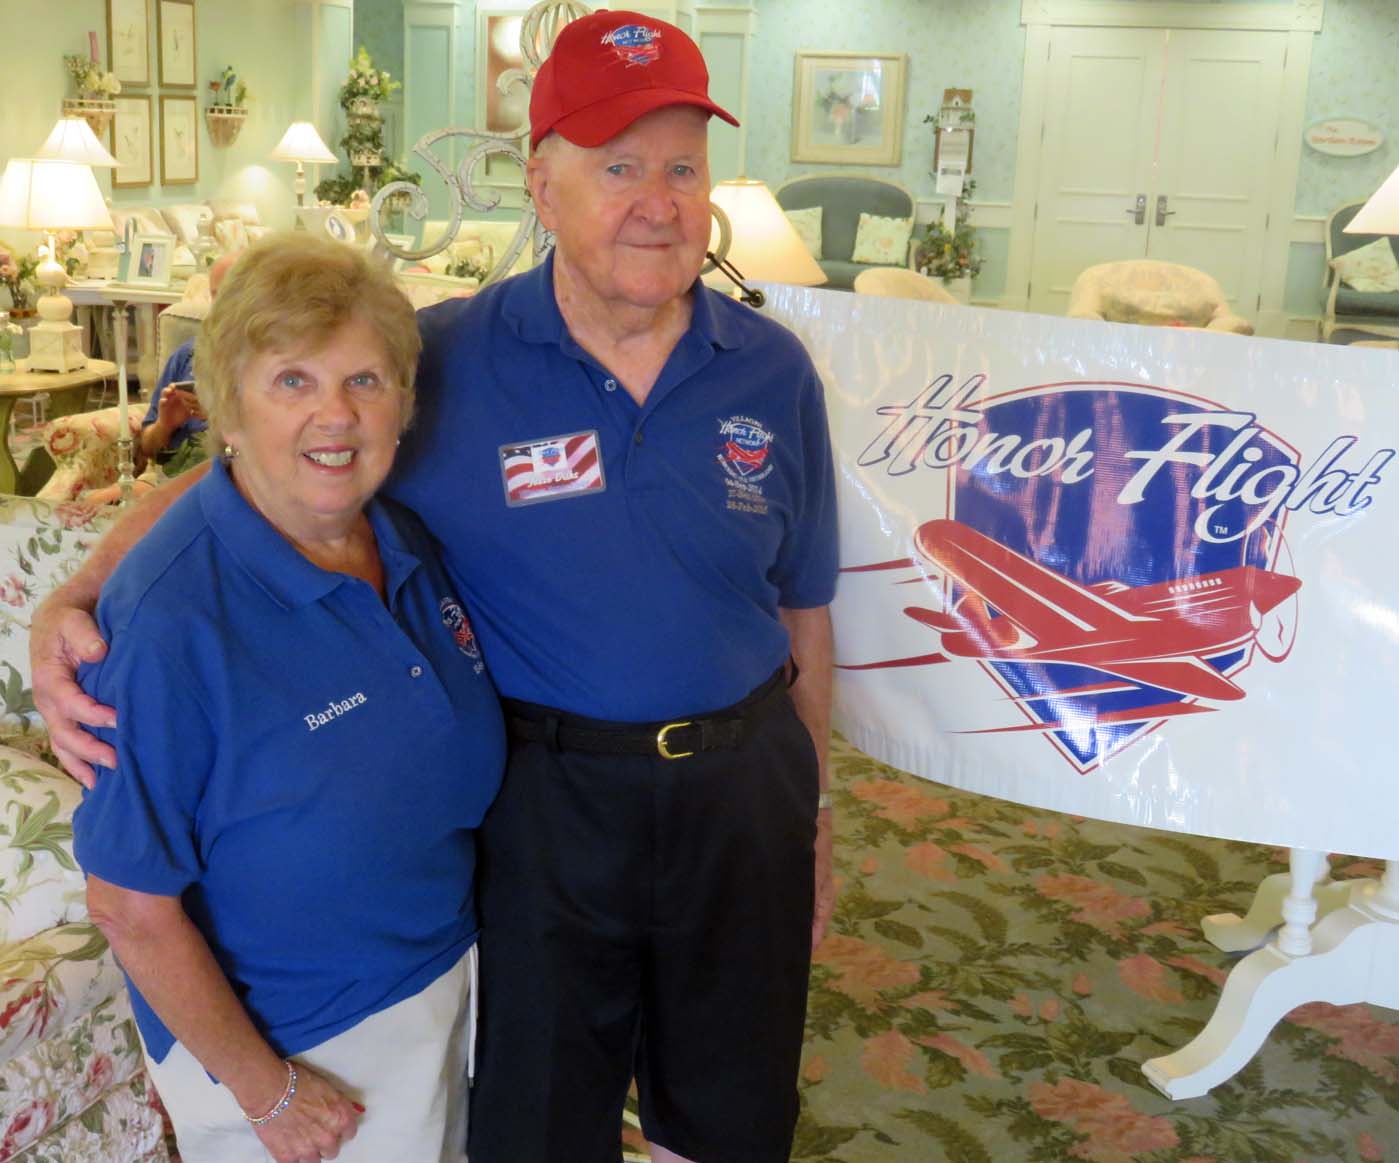 Residents encouraged to support vets on flightless Honor Flight later this month